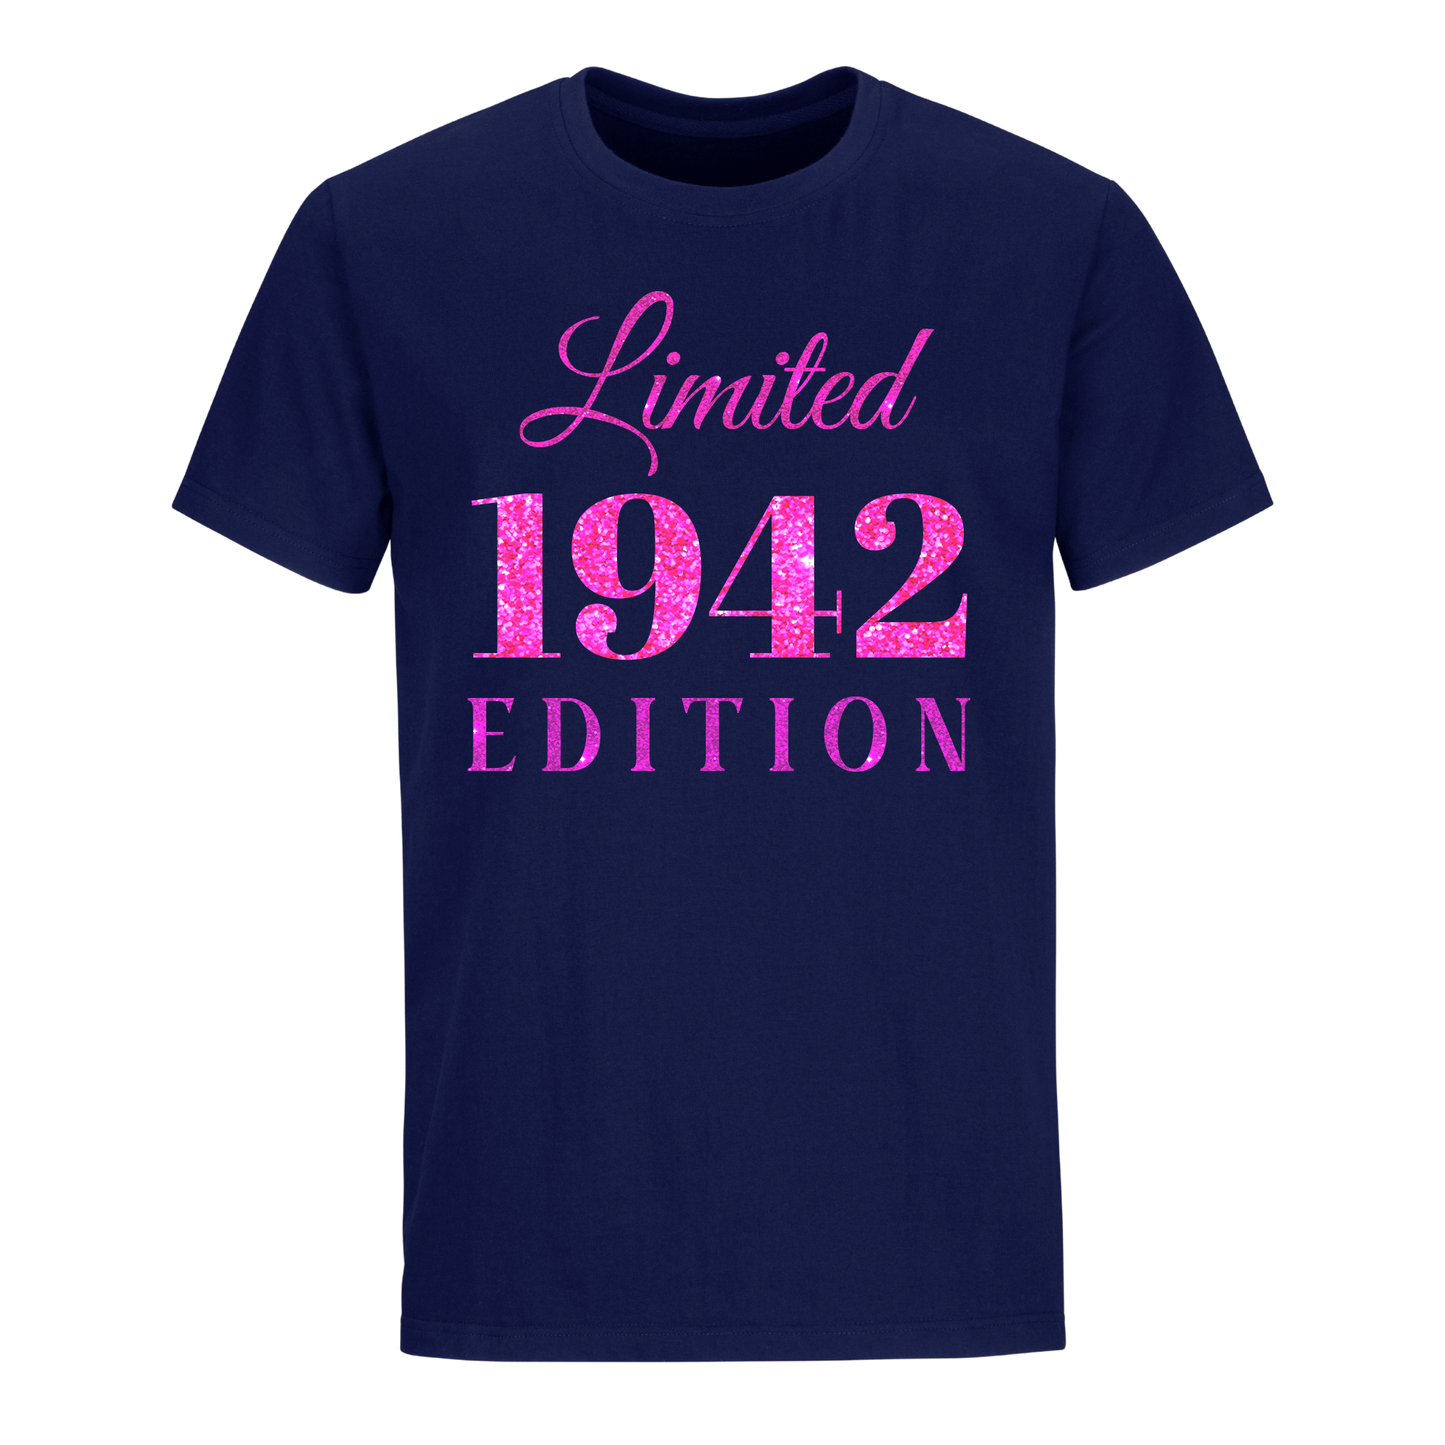 LIMITED EDITION 1942 FRONT AND BACK DESIGN UNISEX SHIRT